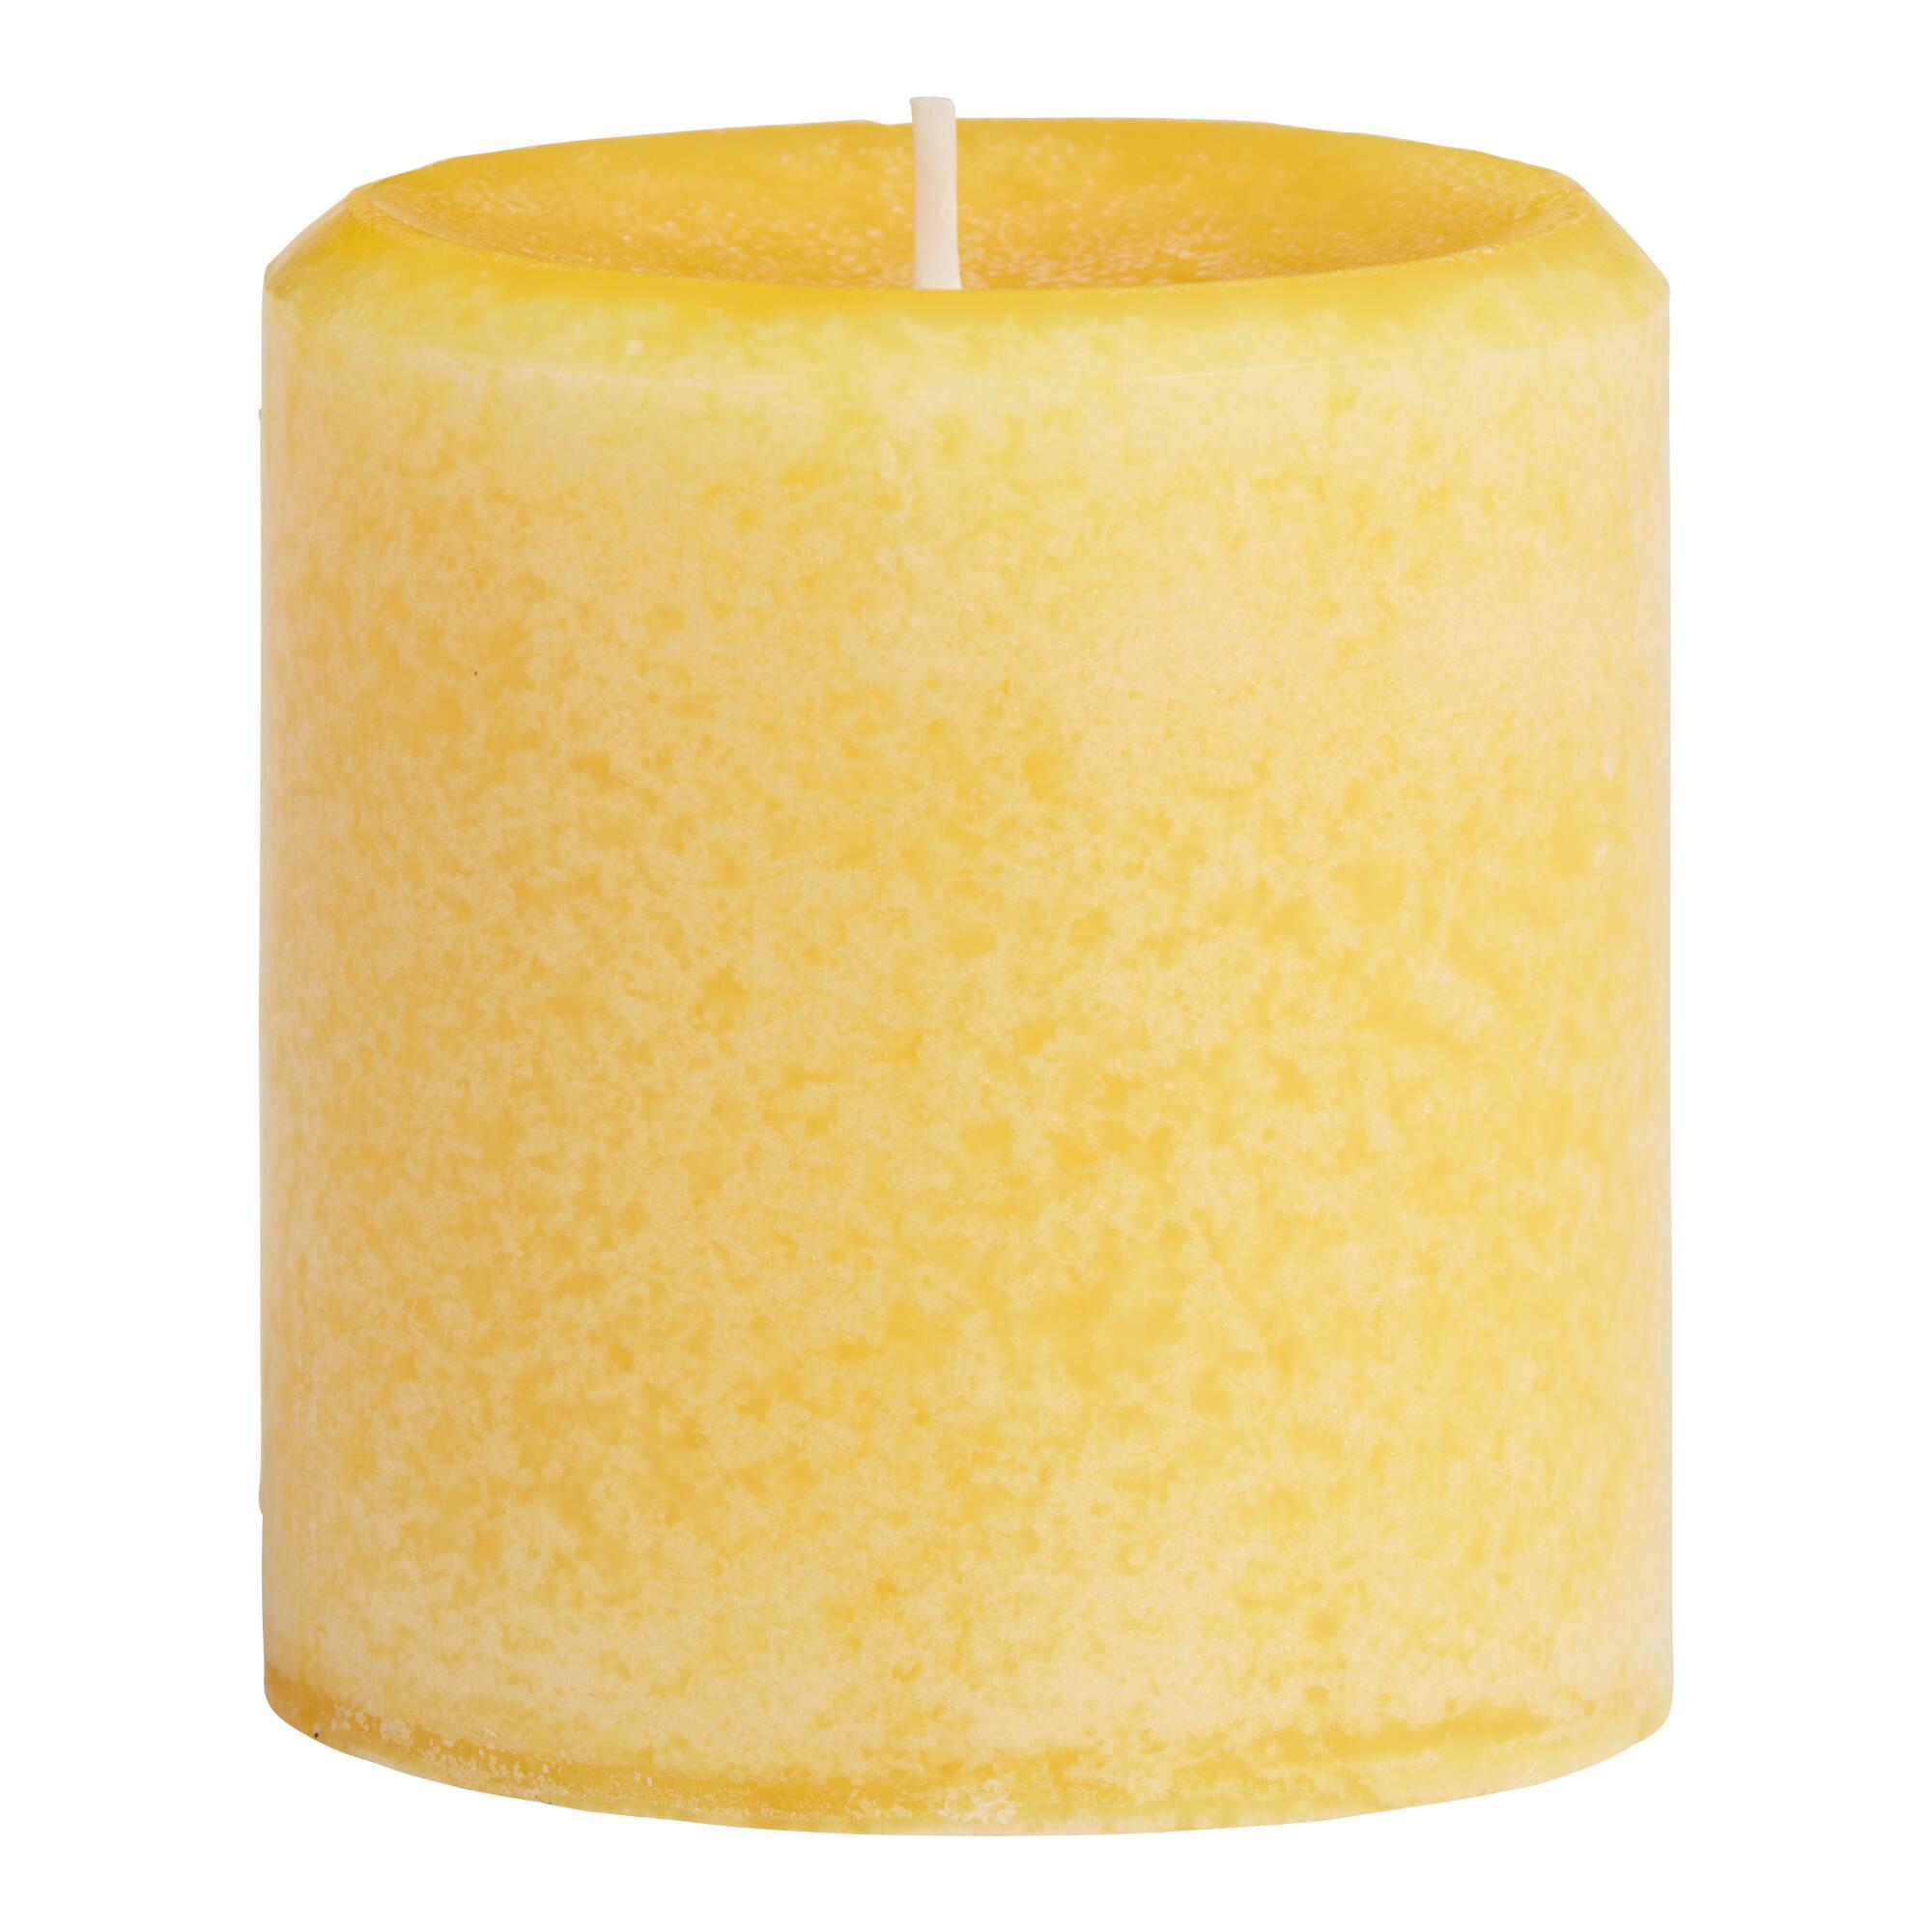 3x3 Limoncello Mottled Pillar Scented Candle: Yellow - Scented Wax by World Market